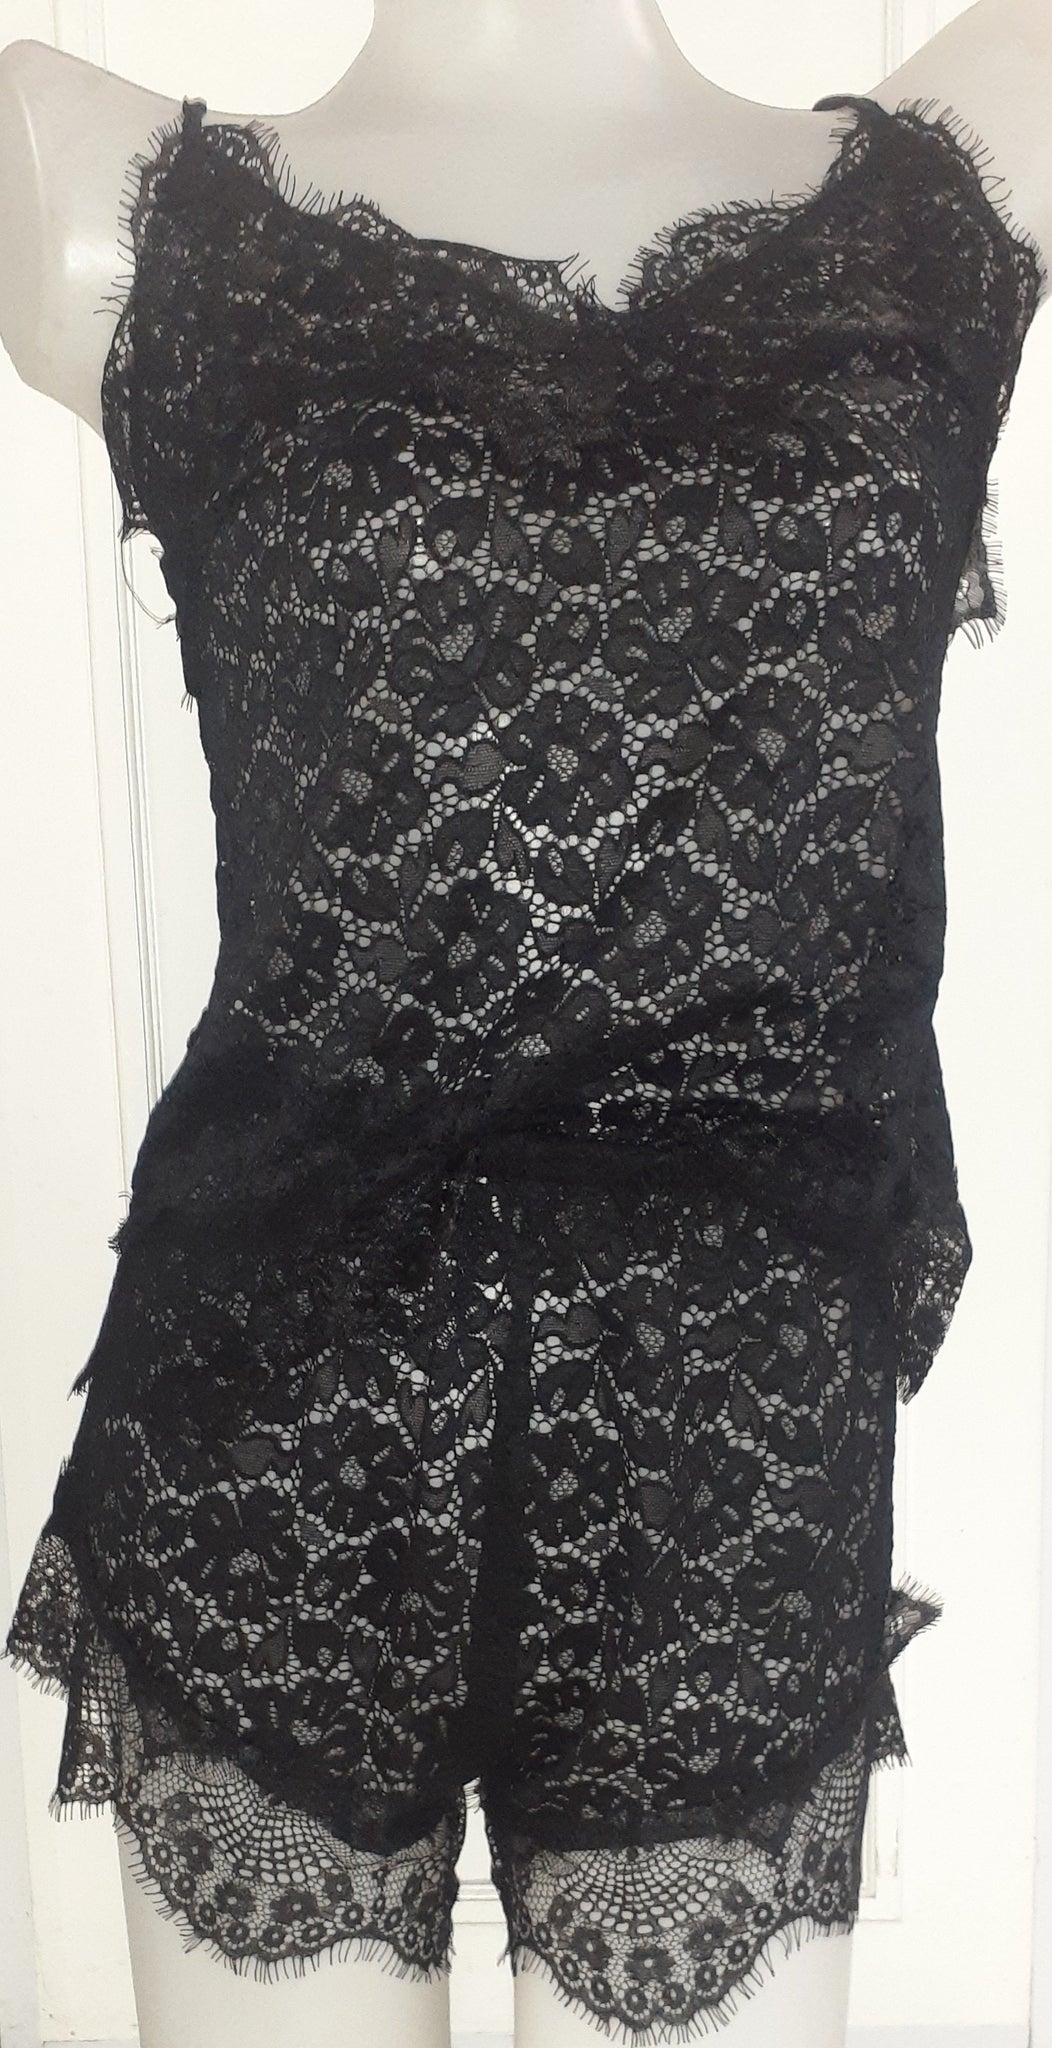 Women's black lace trim floral lace sleepwear cami top and shorts